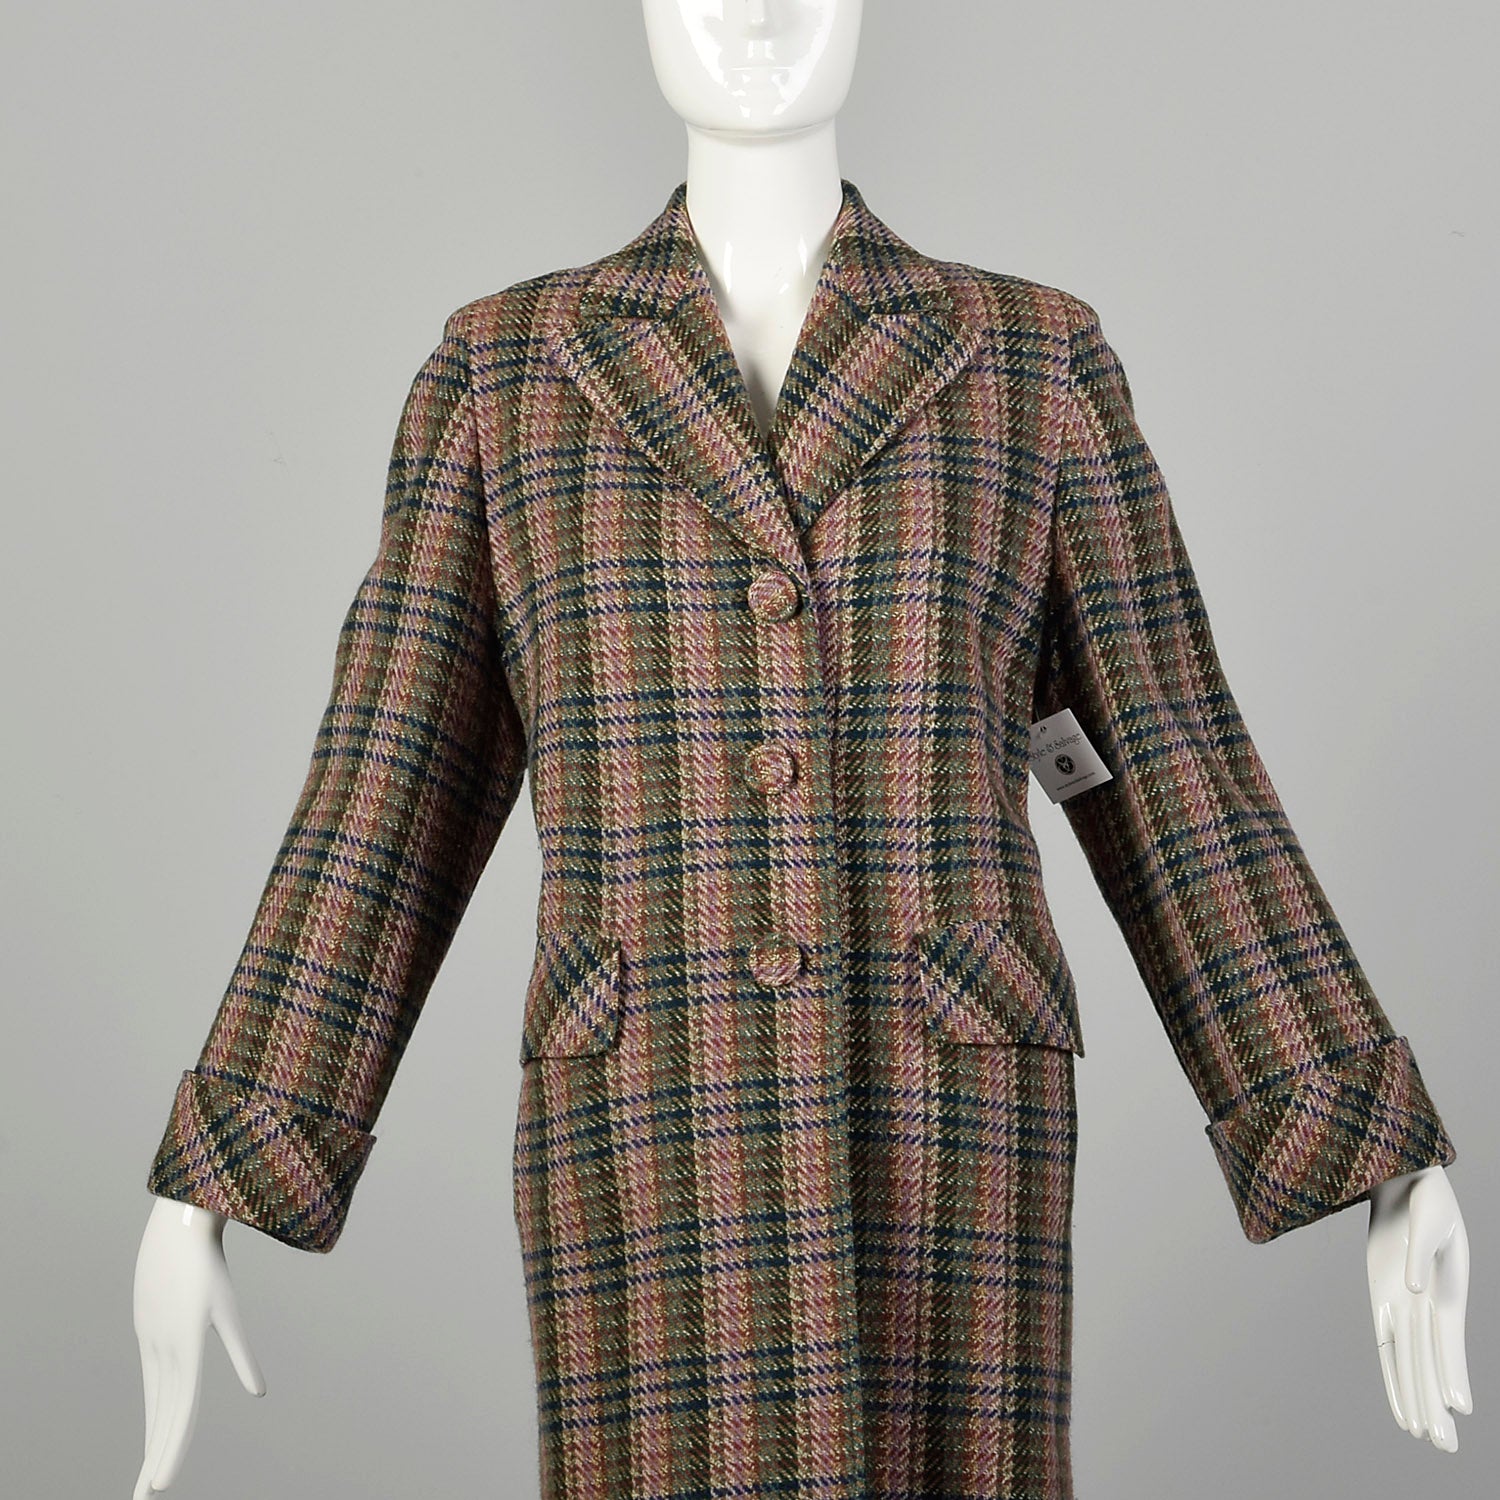 Medium 1950s Lavender Green Navy Tweed Plaid Coat Covered Buttons Winter Weight